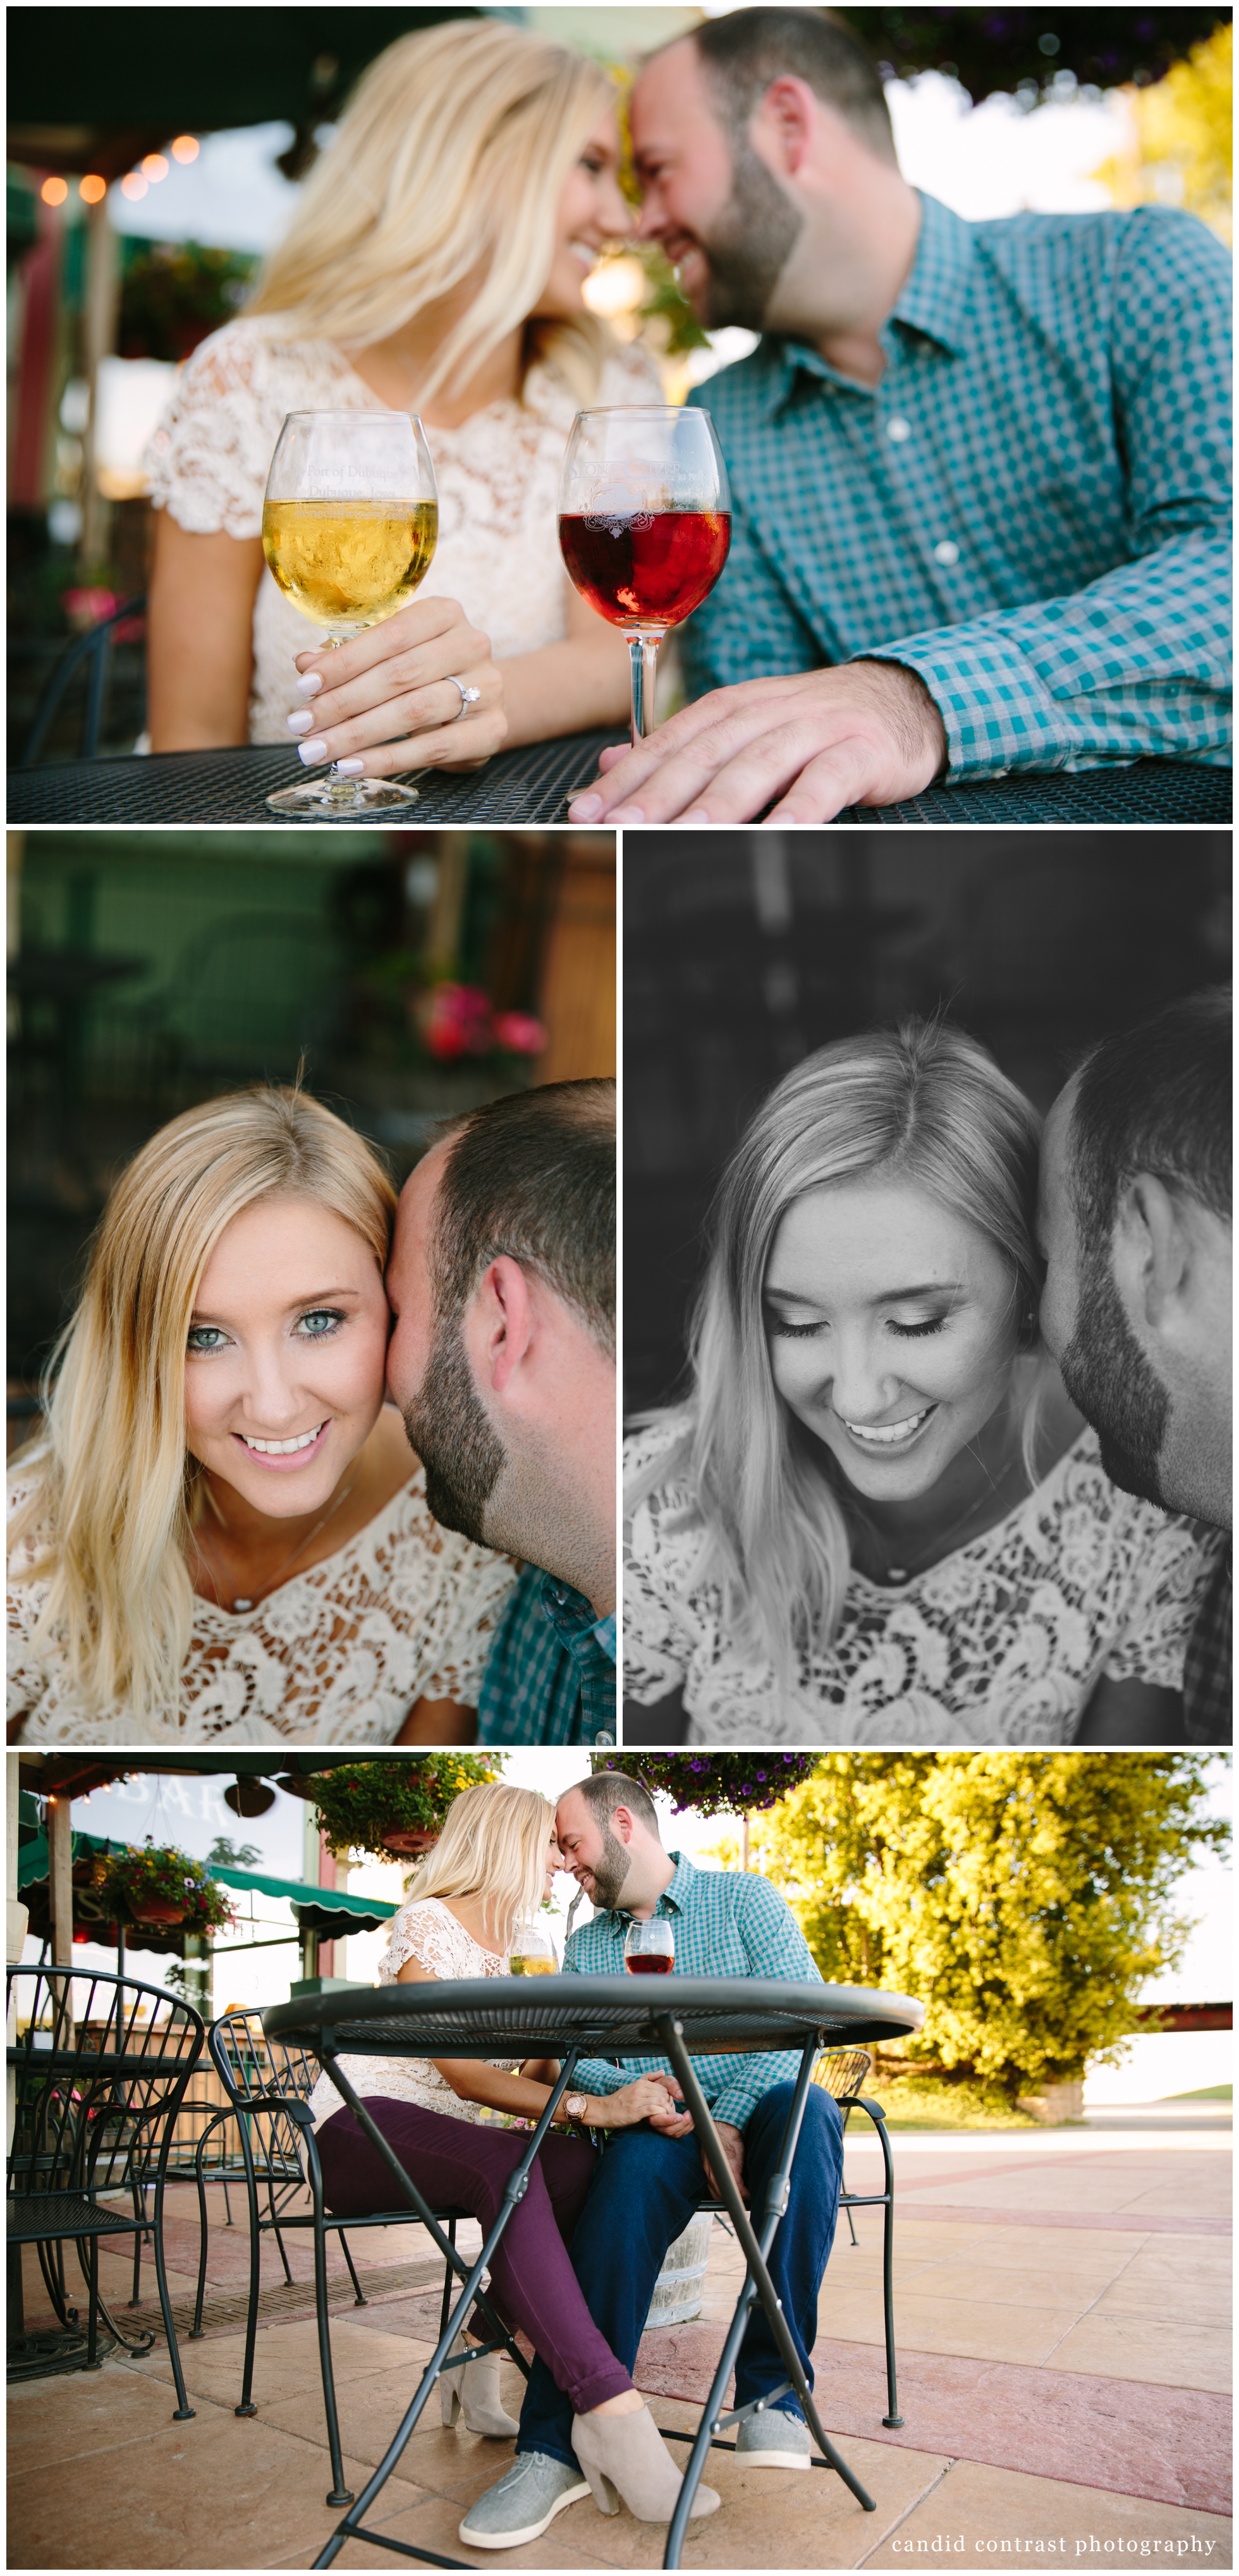 romantic engagement session at stone cliff winery in dubuque iowa, iowa wedding photographer candid contrast photography